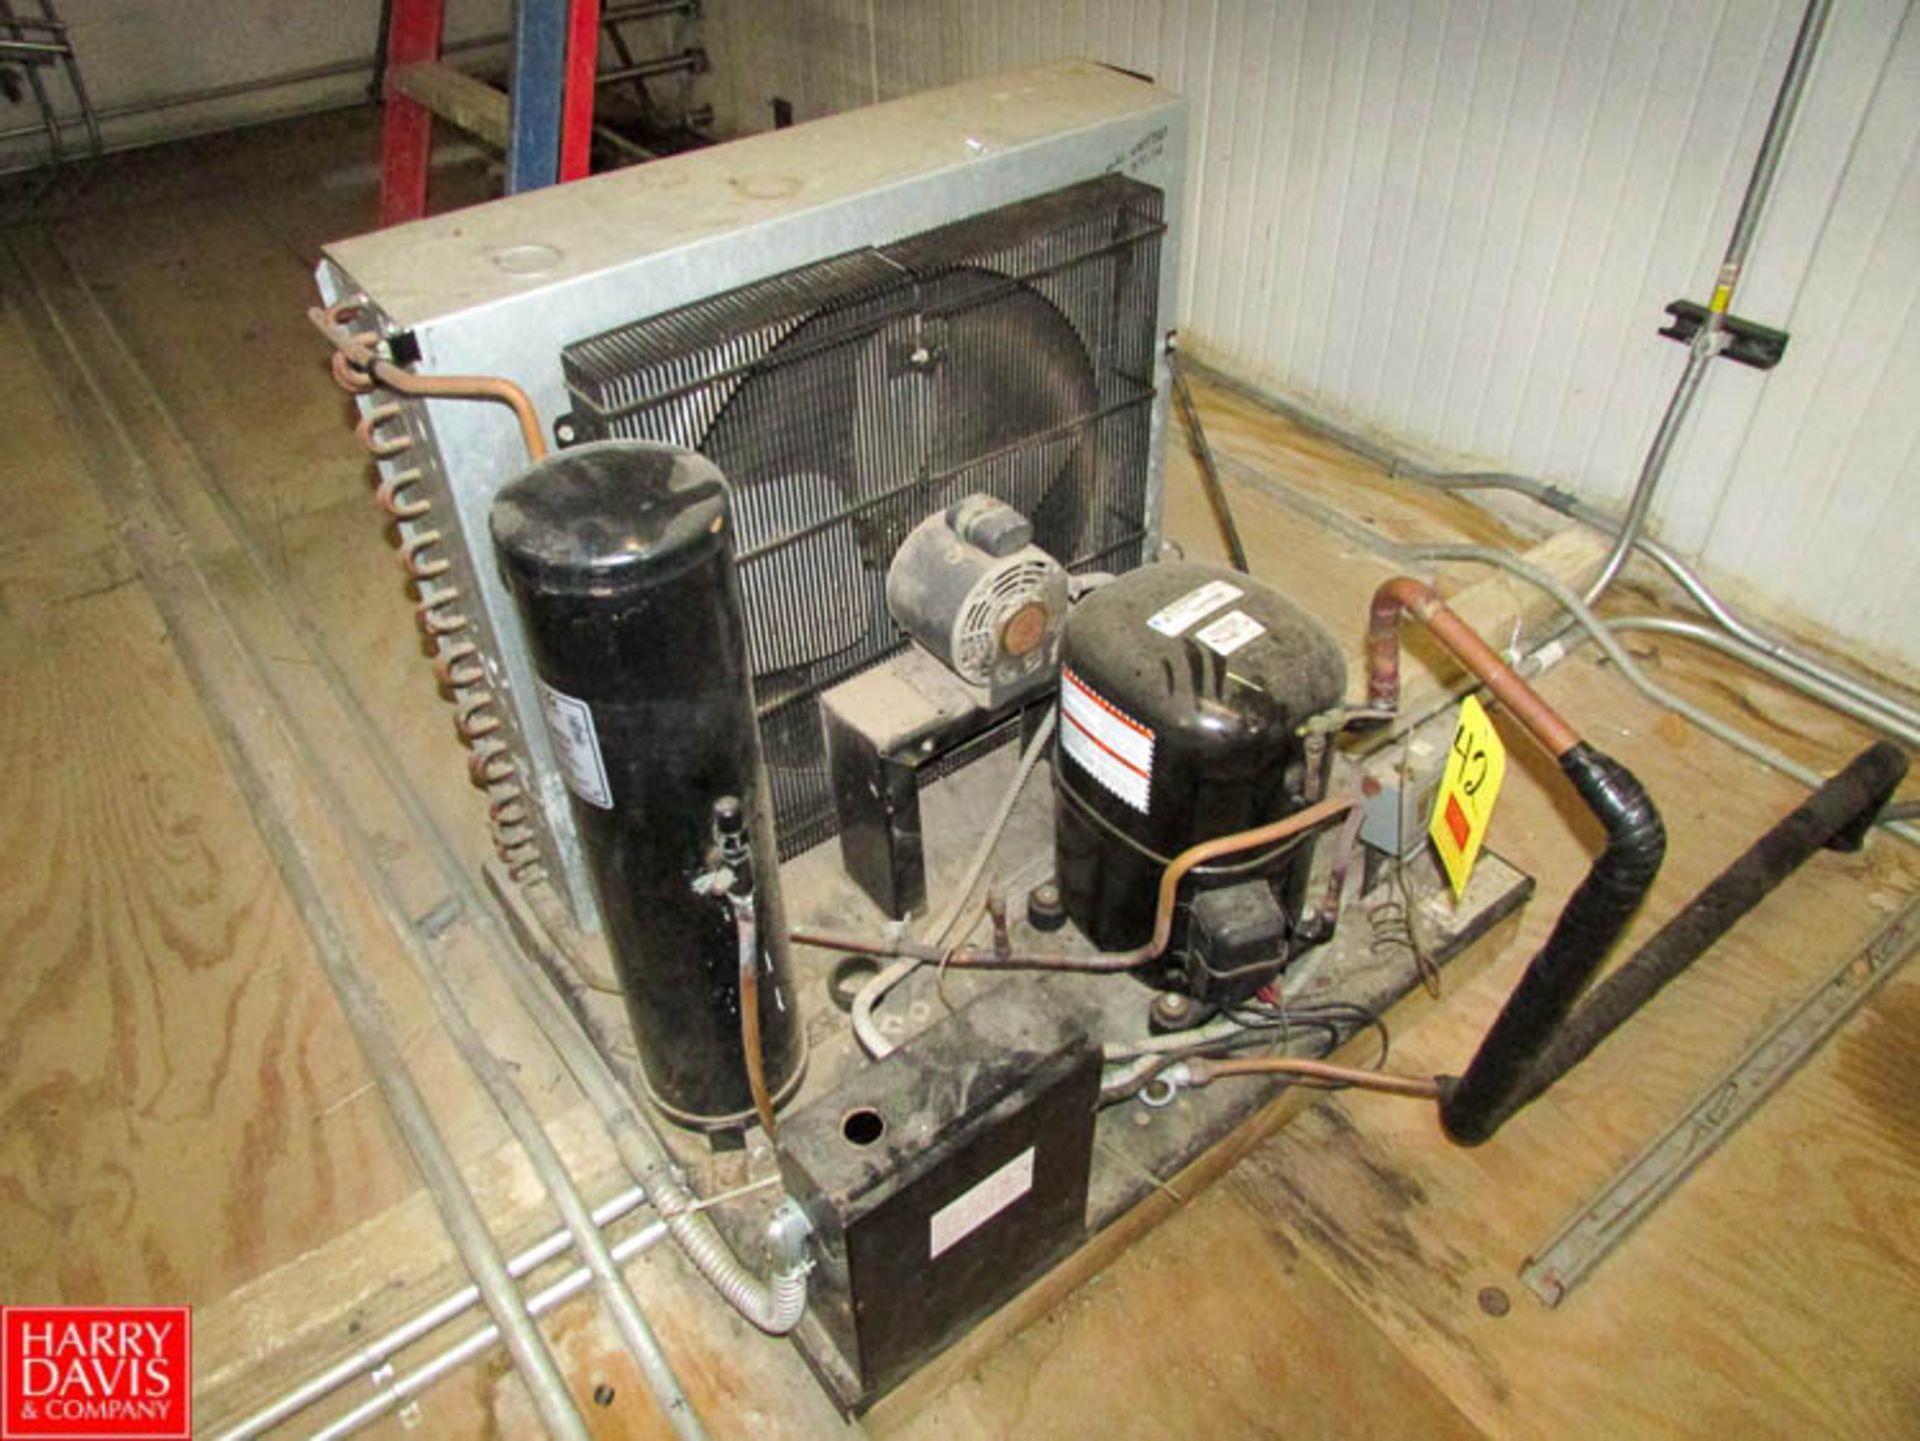 Bohn 3-Fan Freon Blowers with Heatcraft Condensing Unit, Model JH0401D7B and Tecumseh Condensing - Image 3 of 4